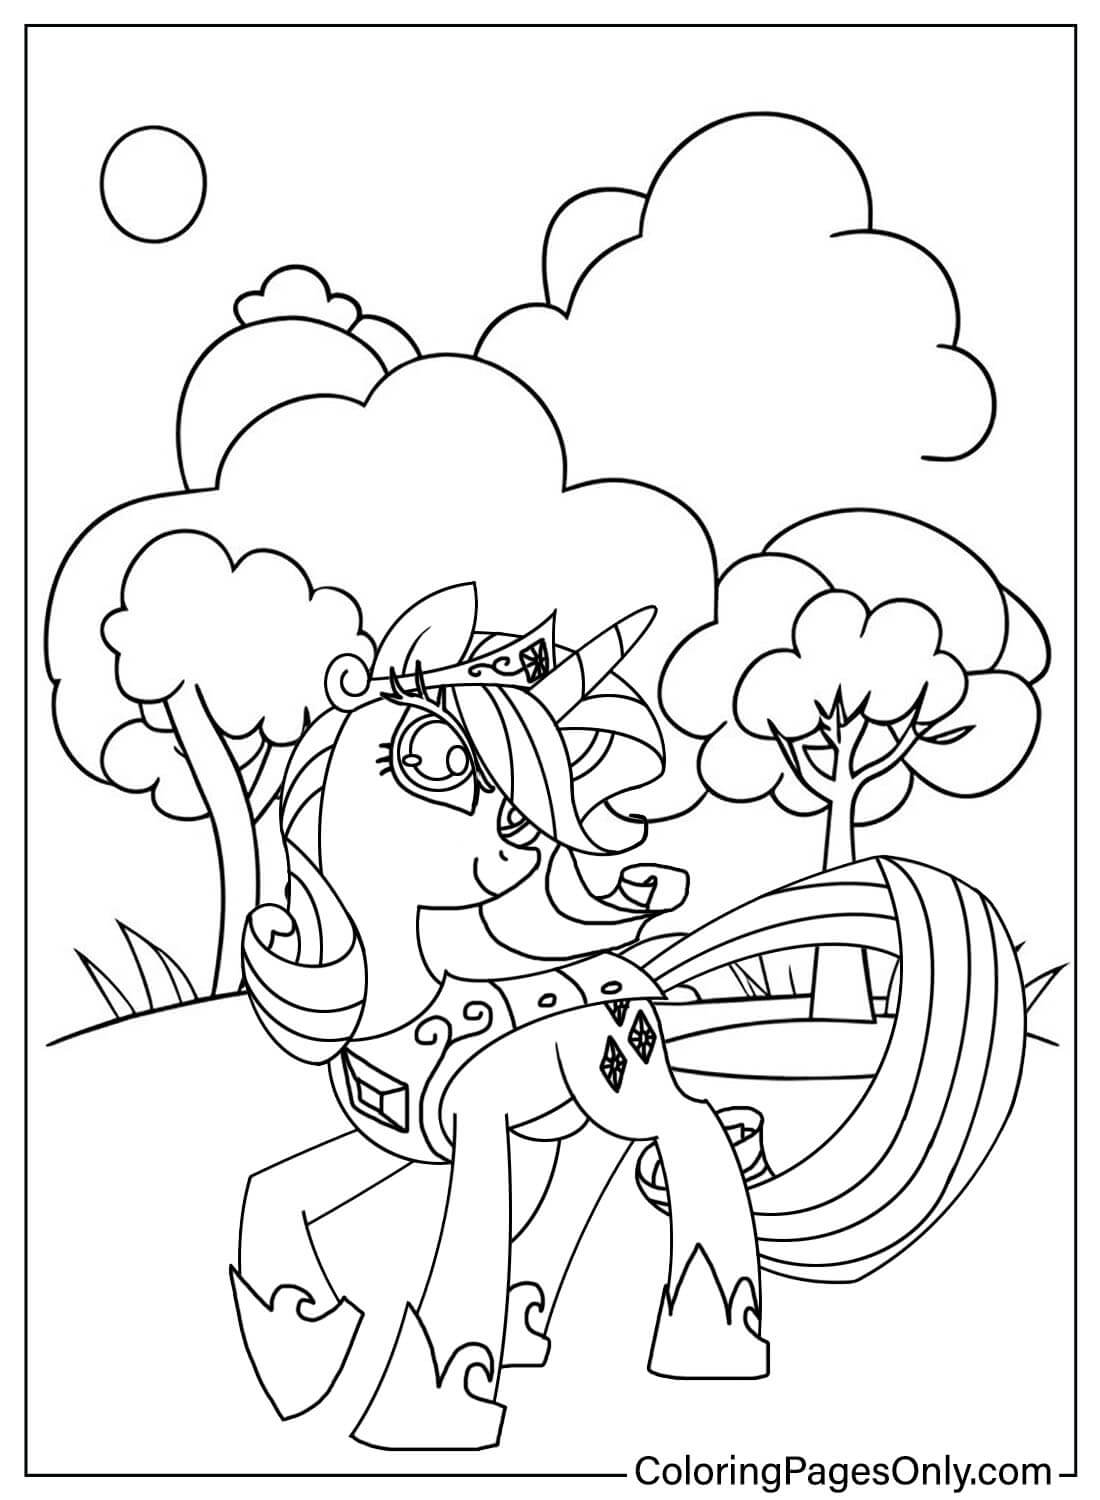 Princess Rarity Coloring Page Free from Rarity